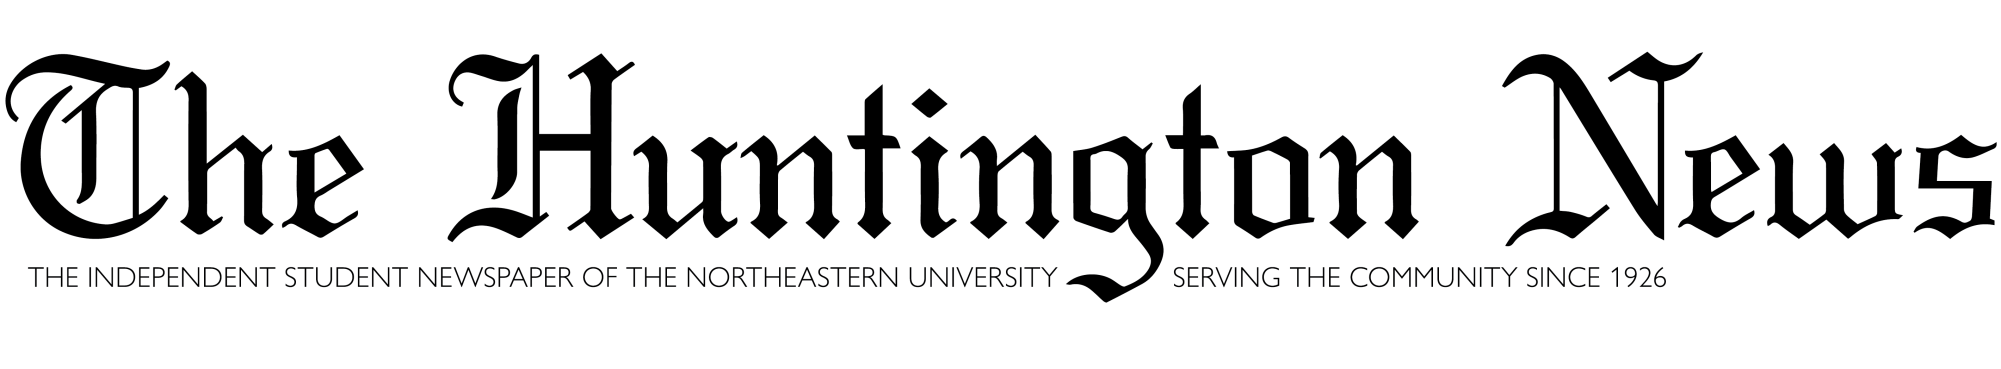 The independent student newspaper of Northeastern University